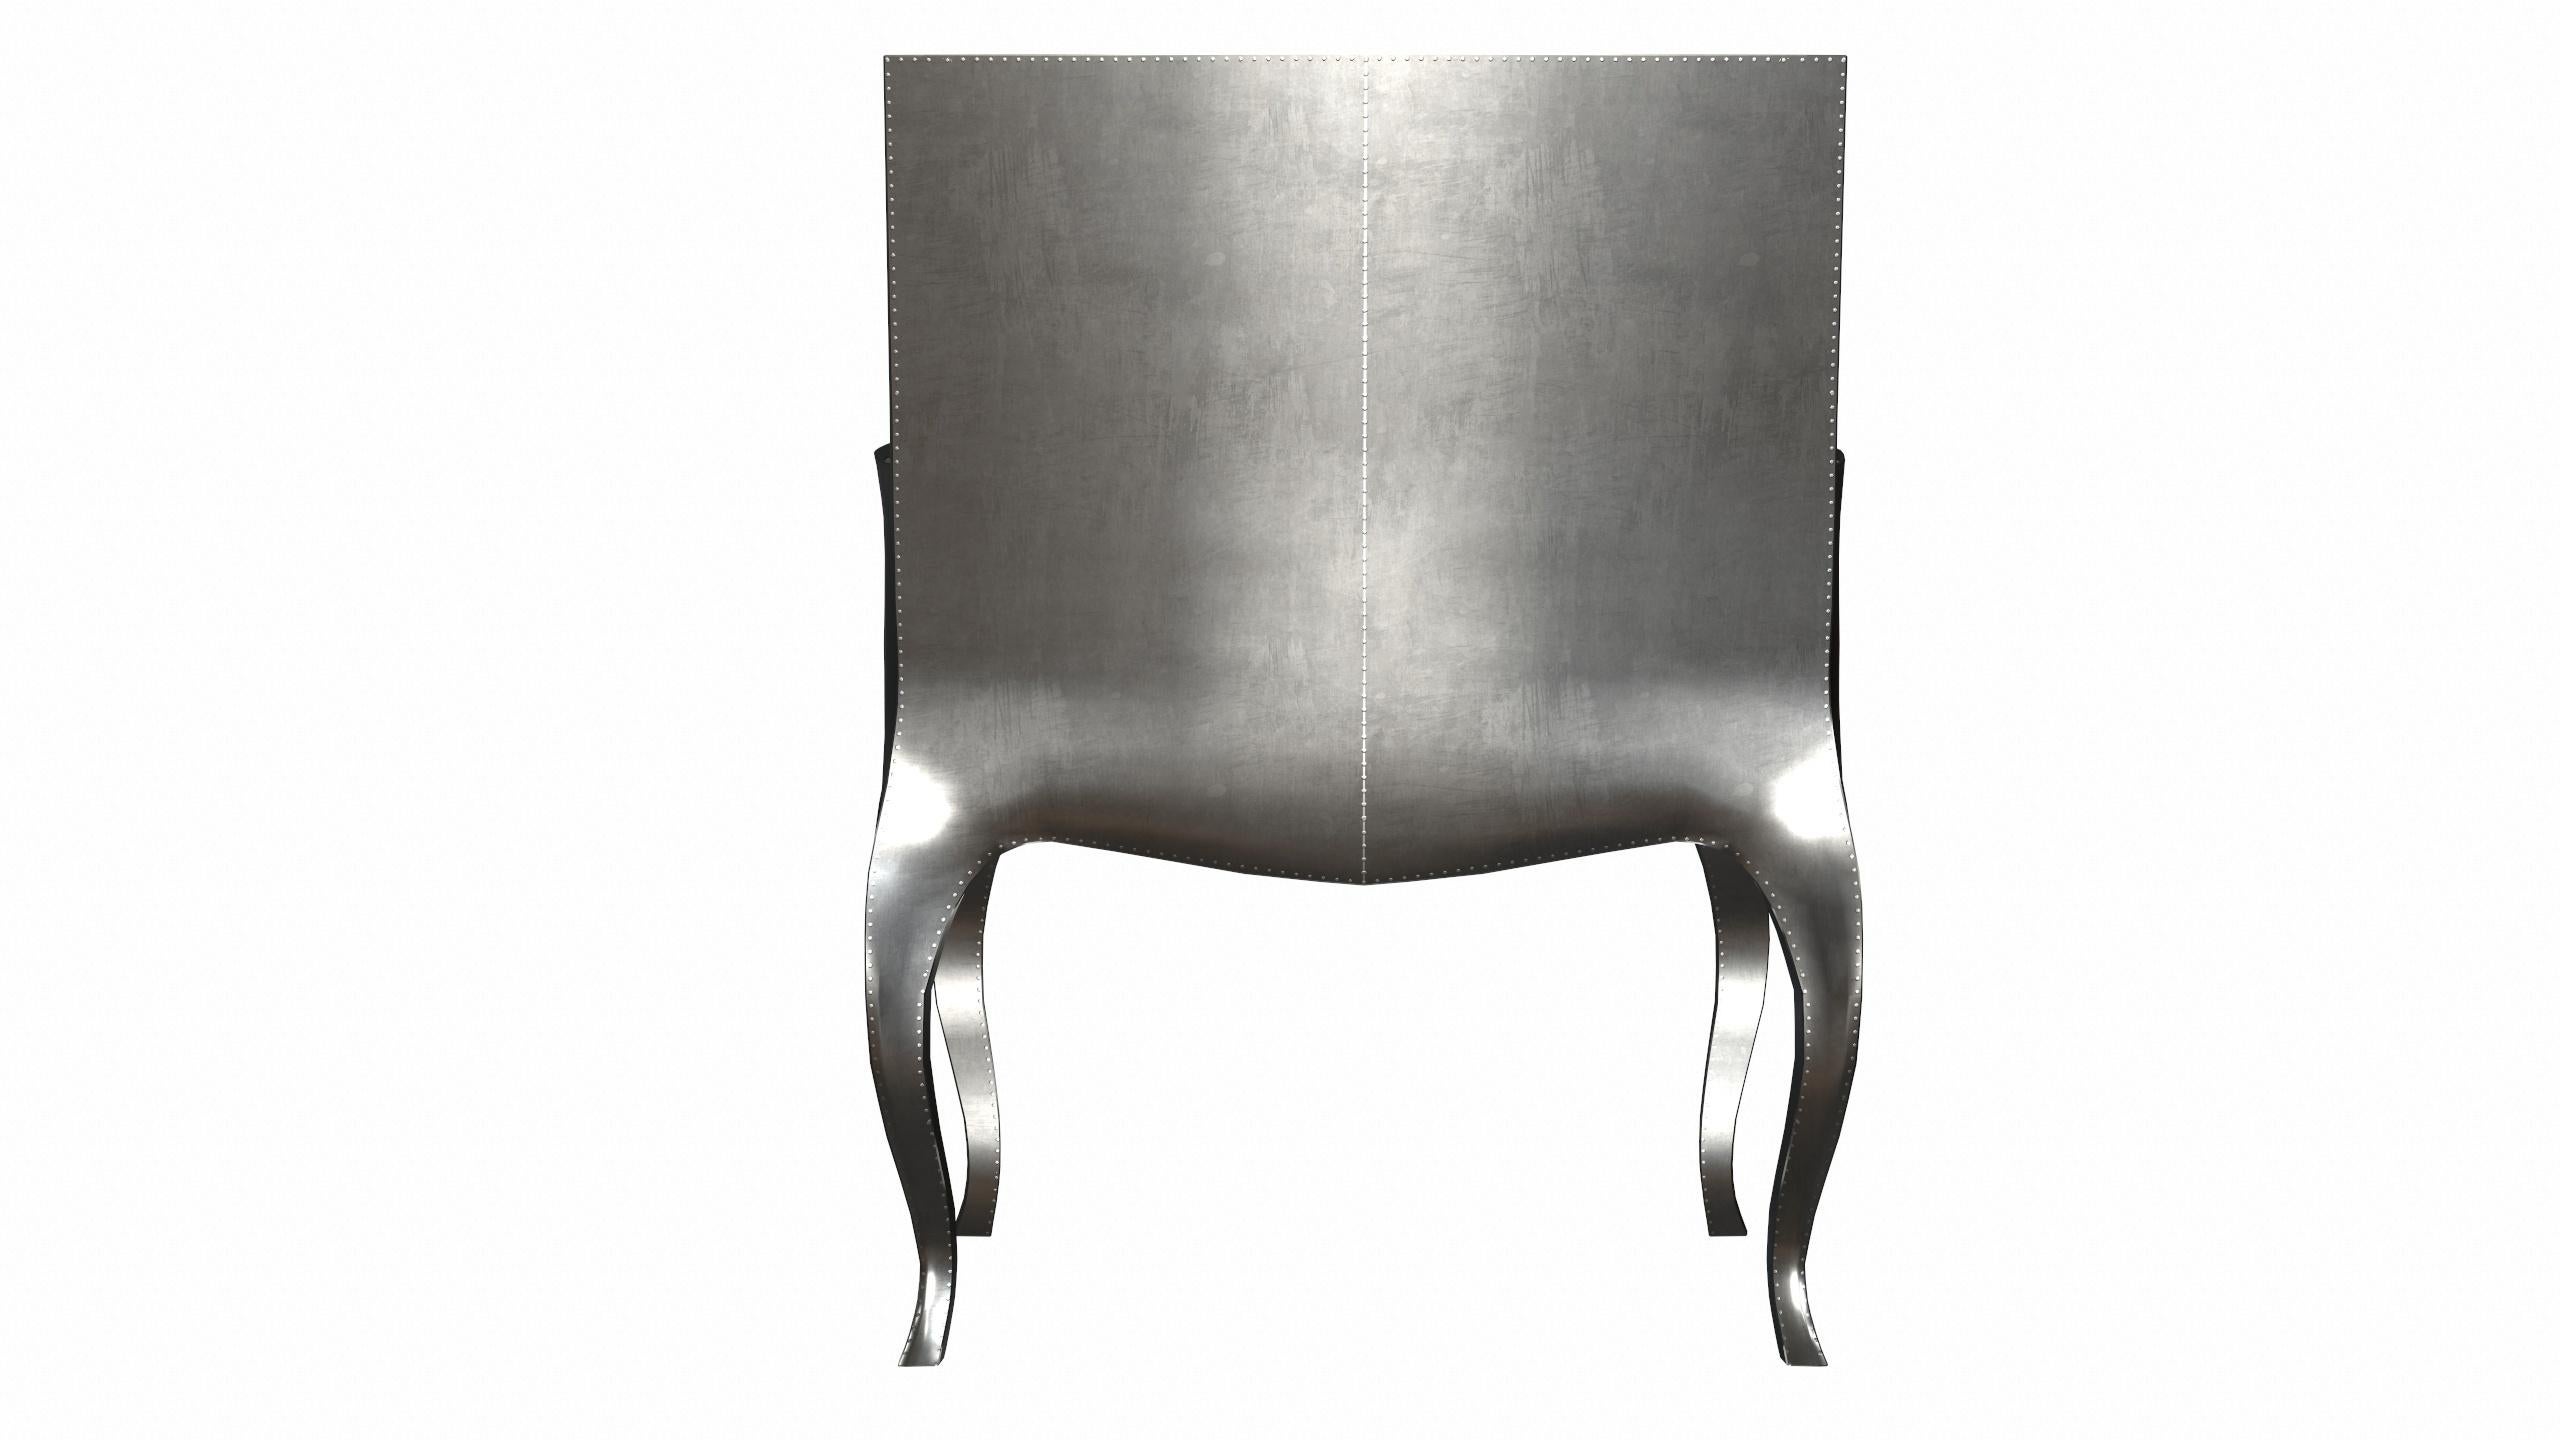 Art Nouveau Chairs in Smooth White Bronze by Paul Mathieu for S. Odegard For Sale 9